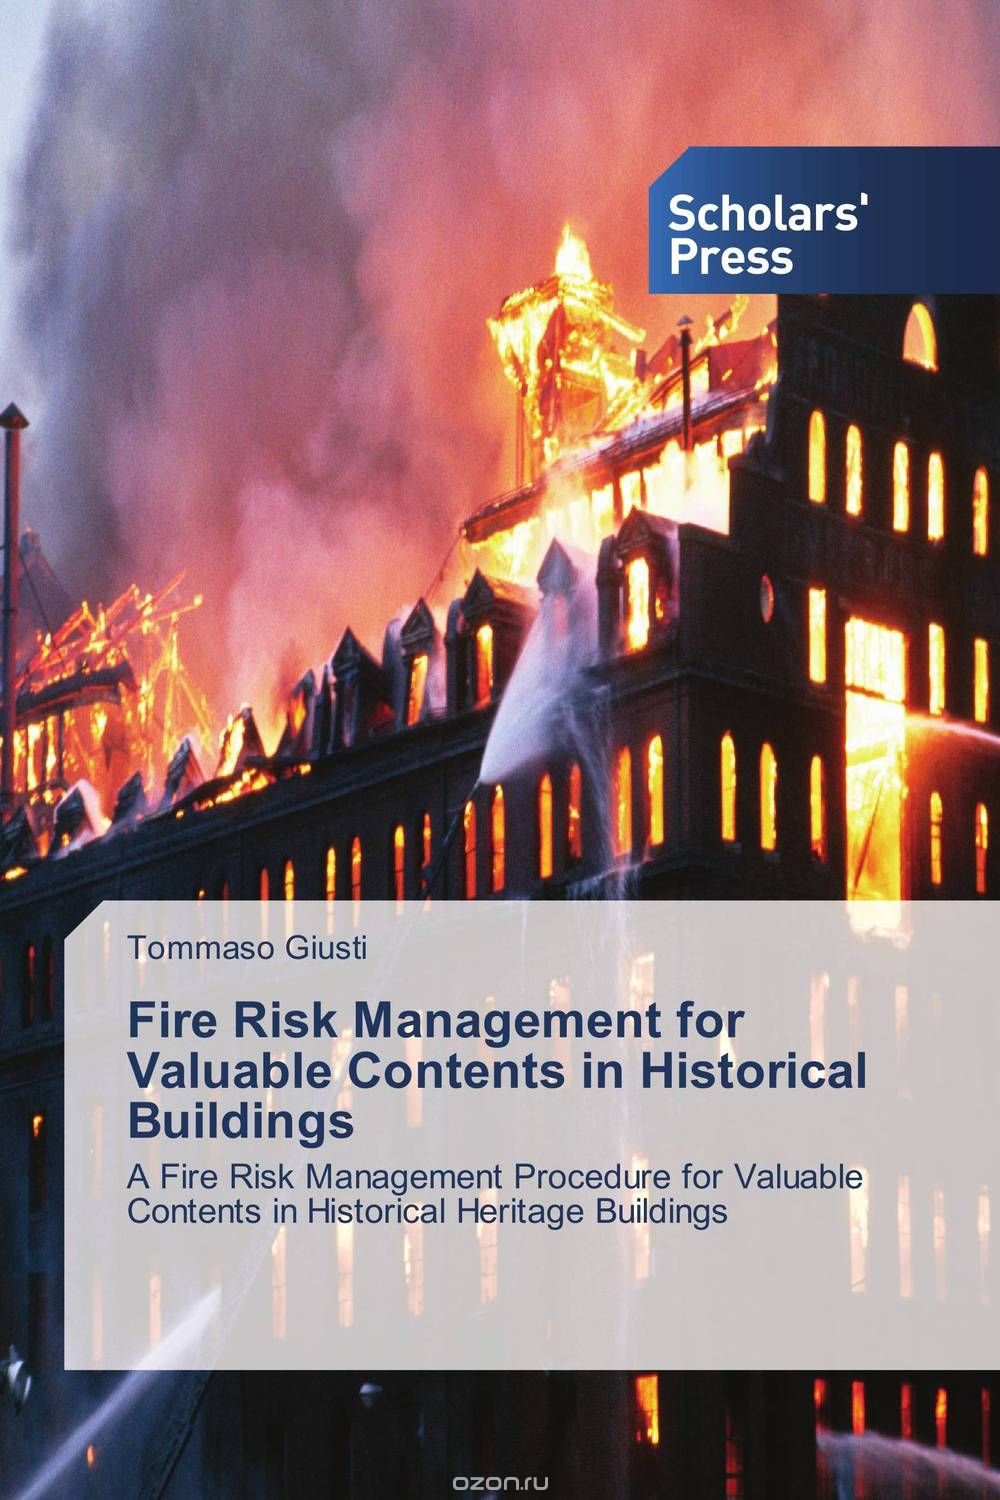 Скачать книгу "Fire Risk Management for Valuable Contents in Historical Buildings"